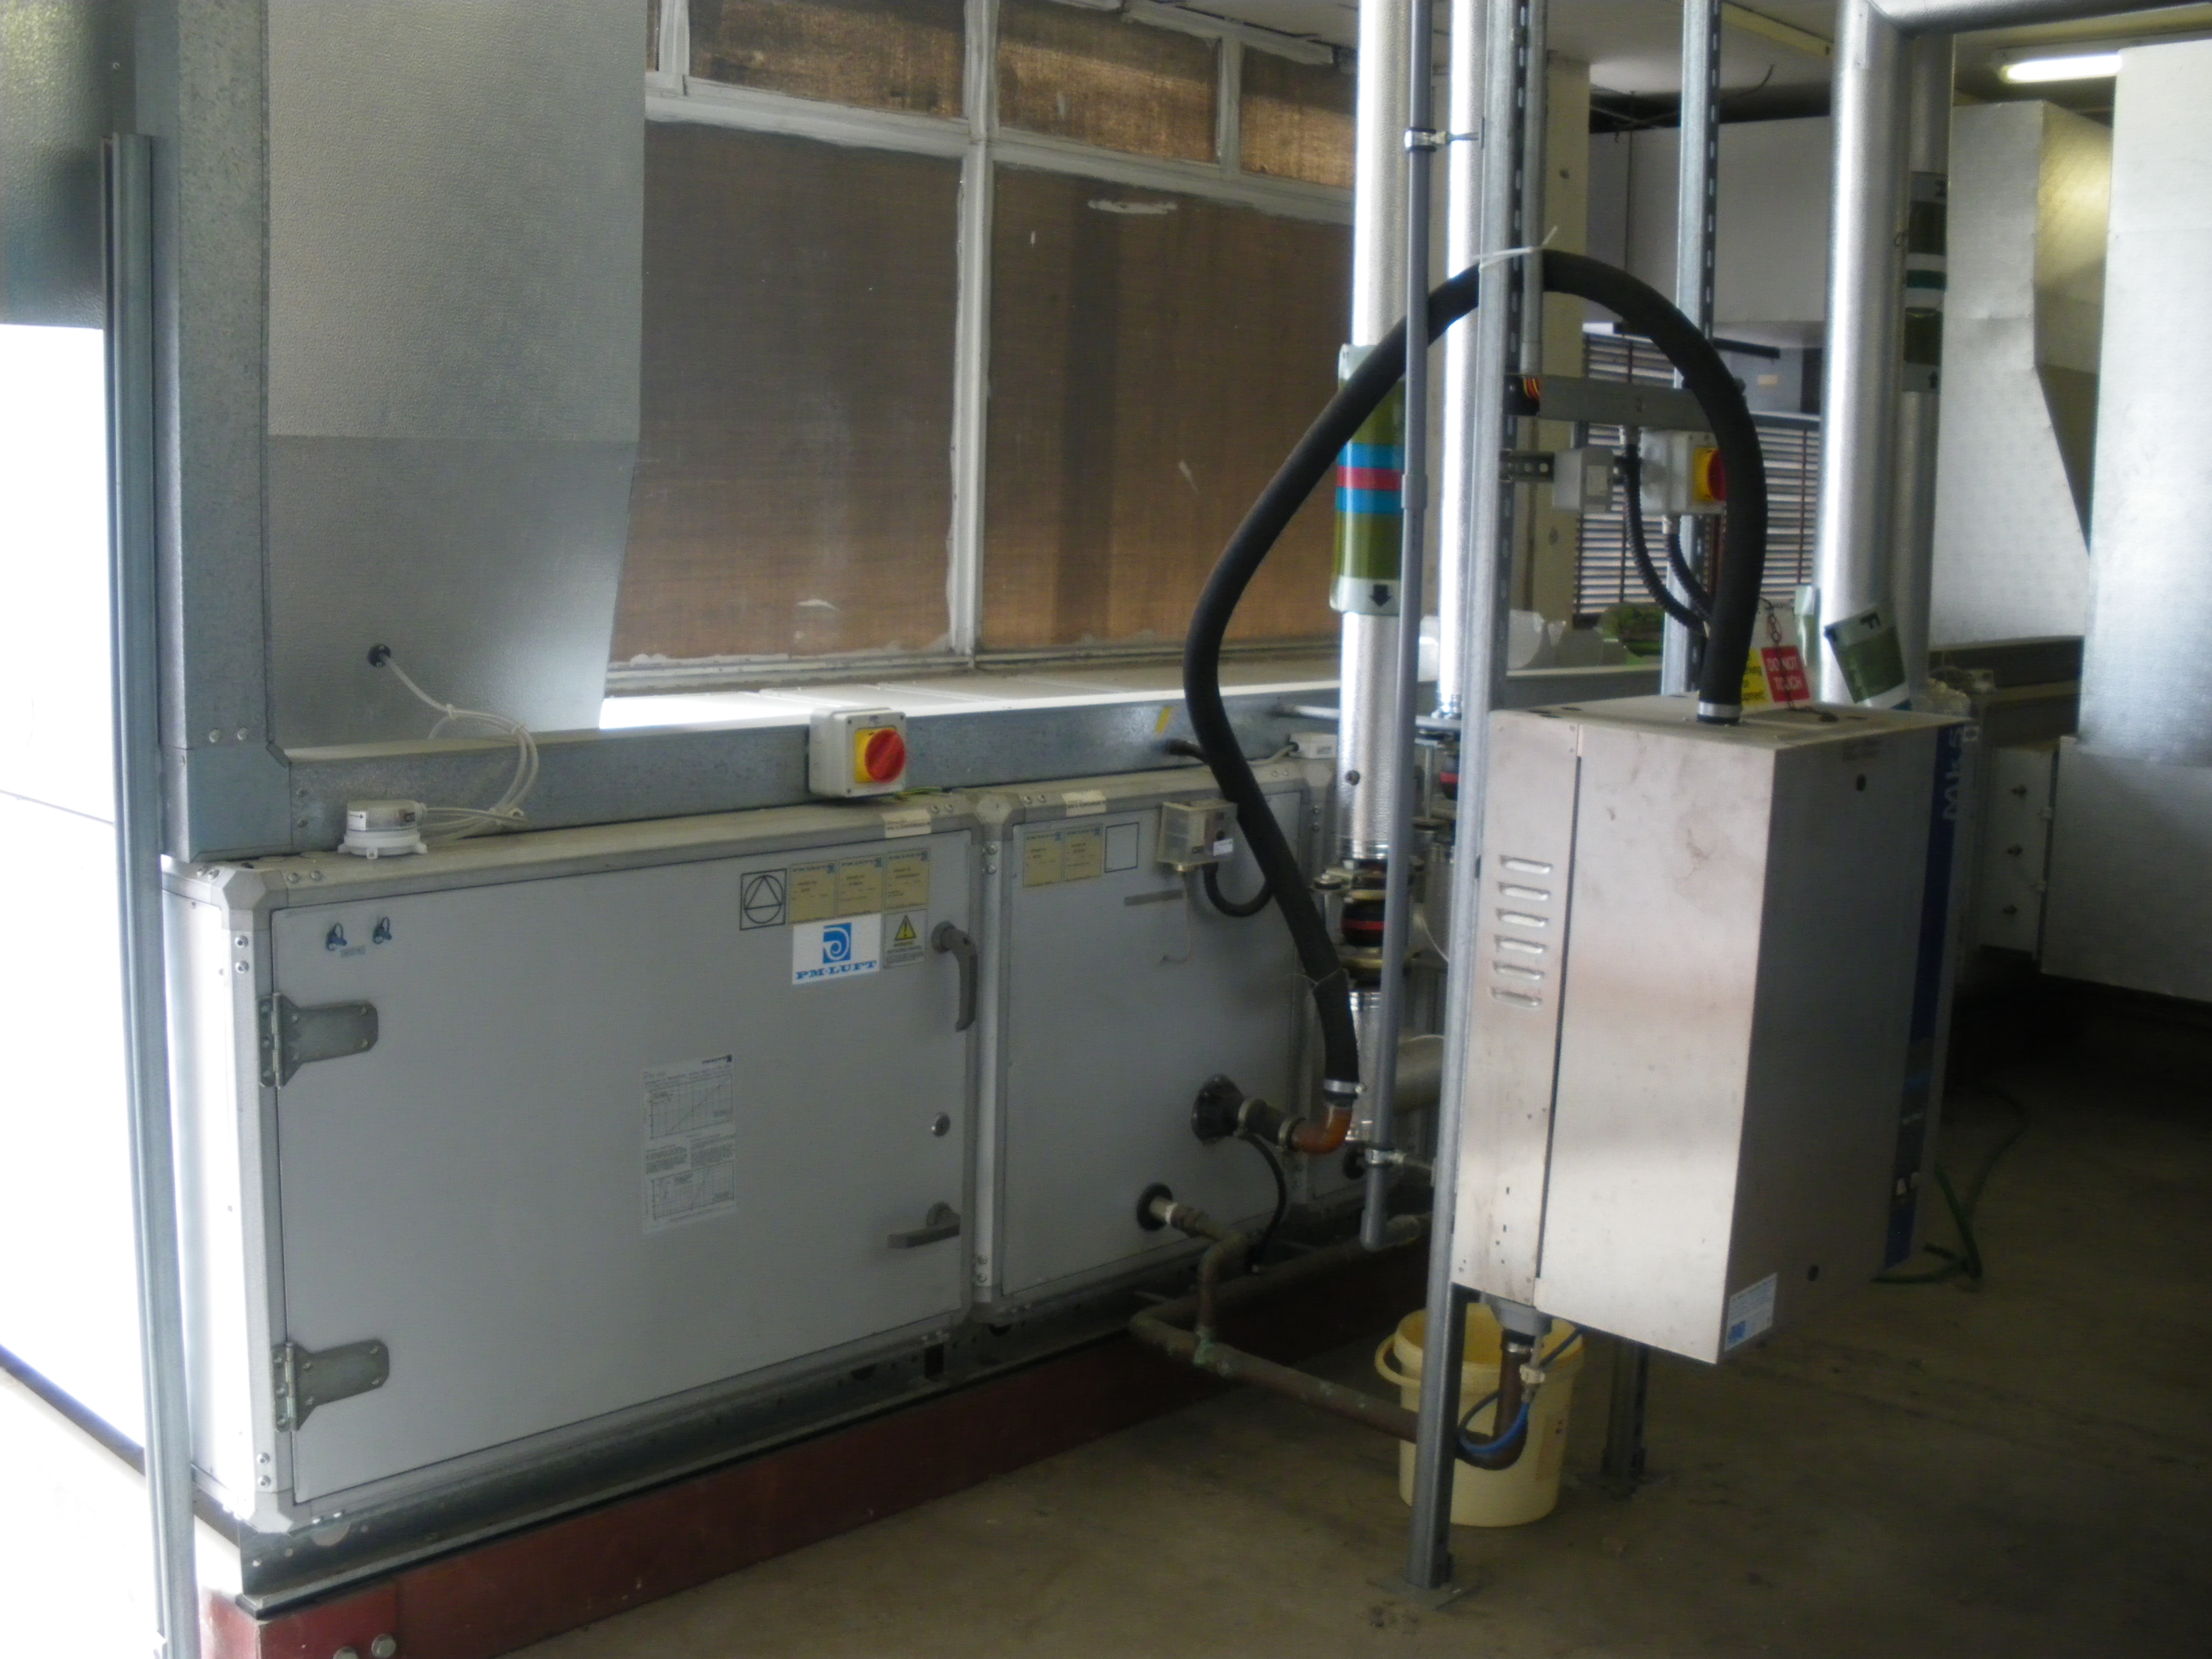 Business Centre ventilation plant - AHU and steam humidifier